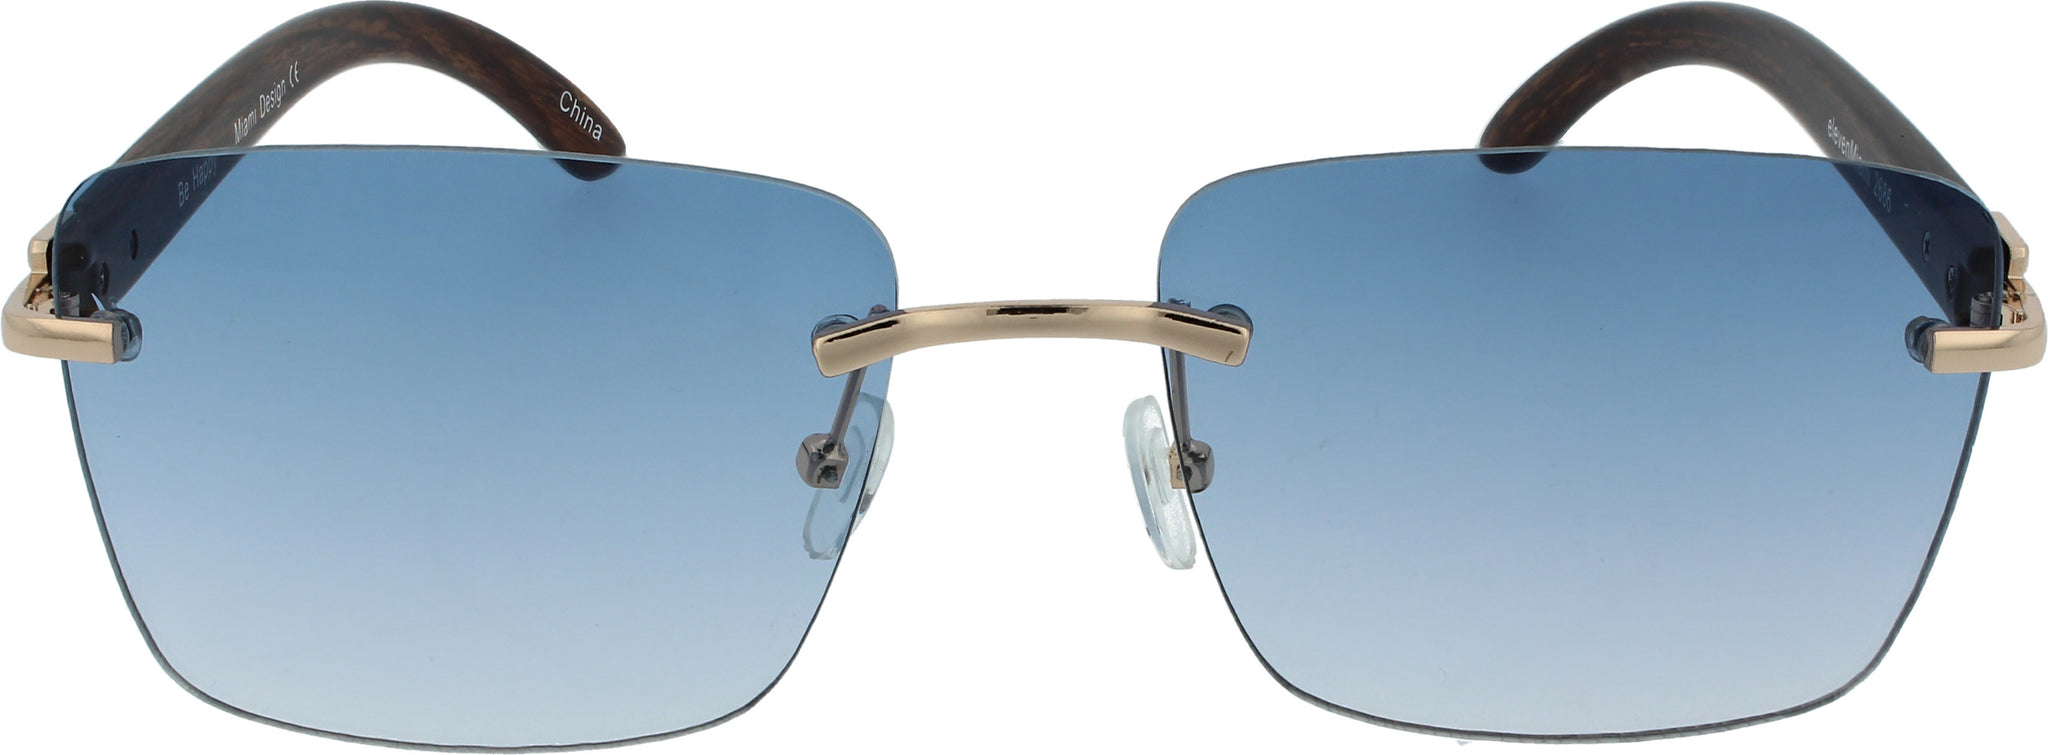 Frameless Sunglasses |Wooden Style Temples | Adjustable Nose Pads | 100% UV Protection | 2686 Blue